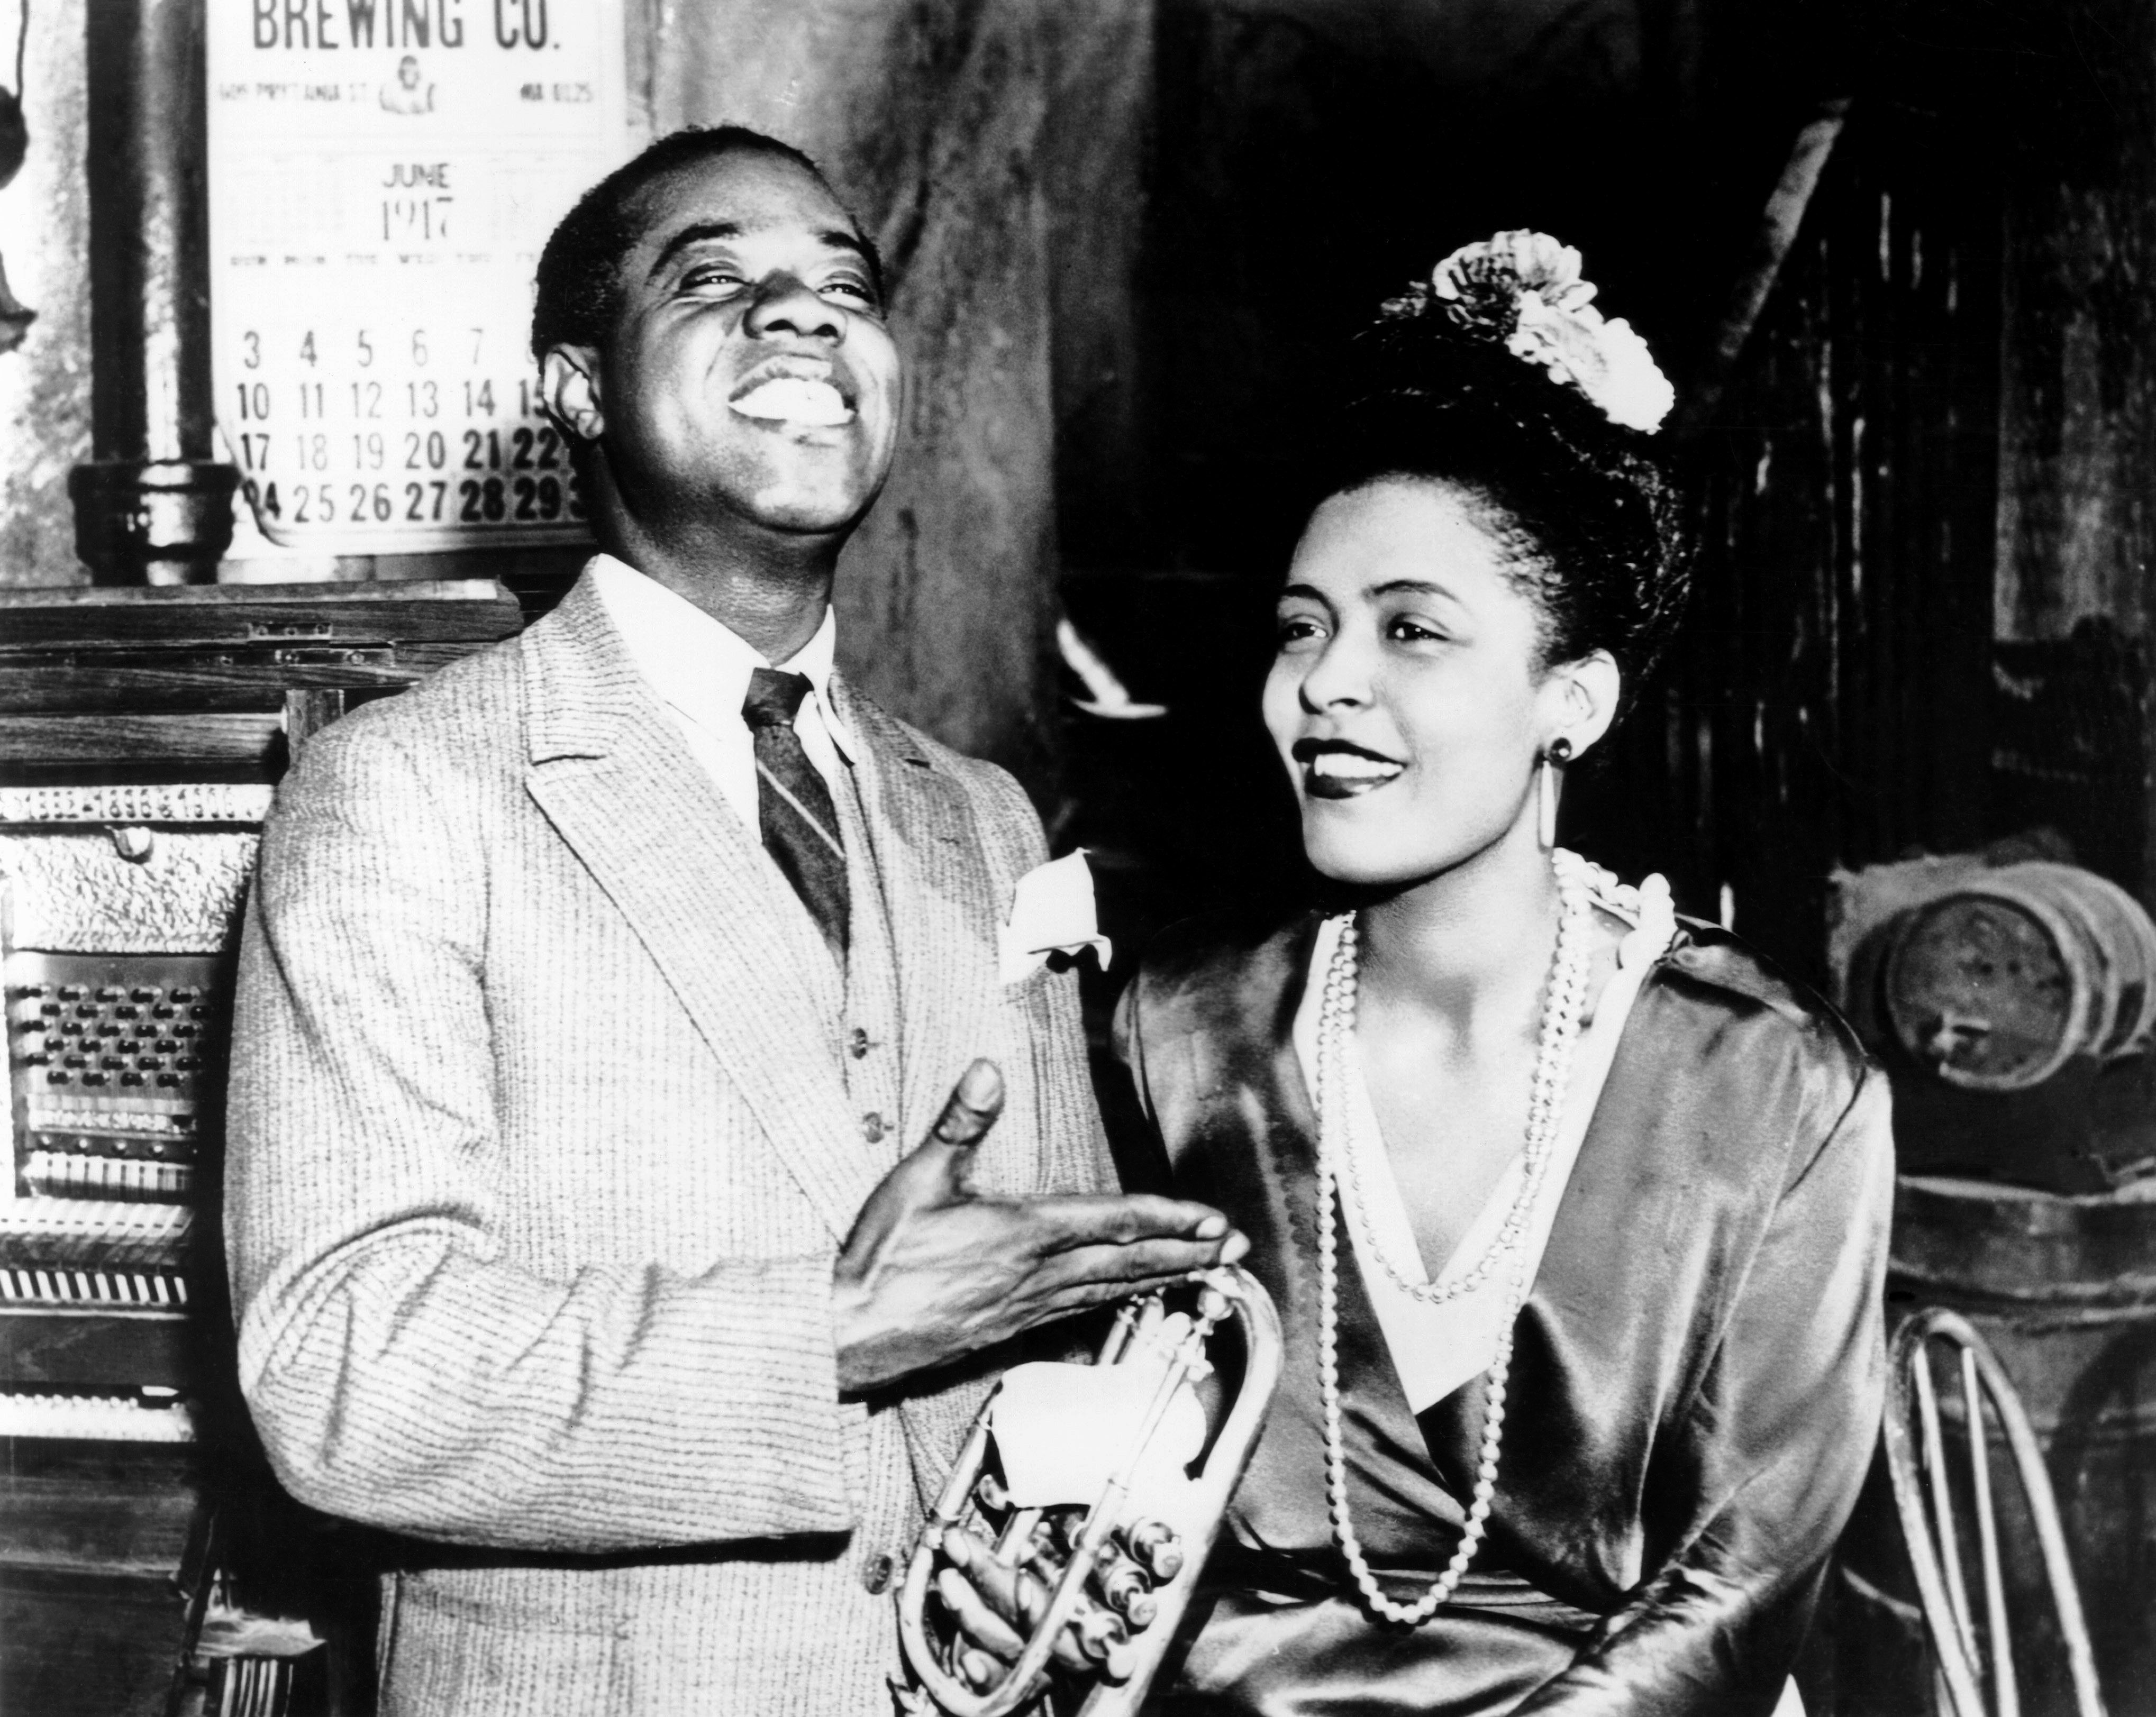 In "New Orleans" con Billie Holiday nel 1947